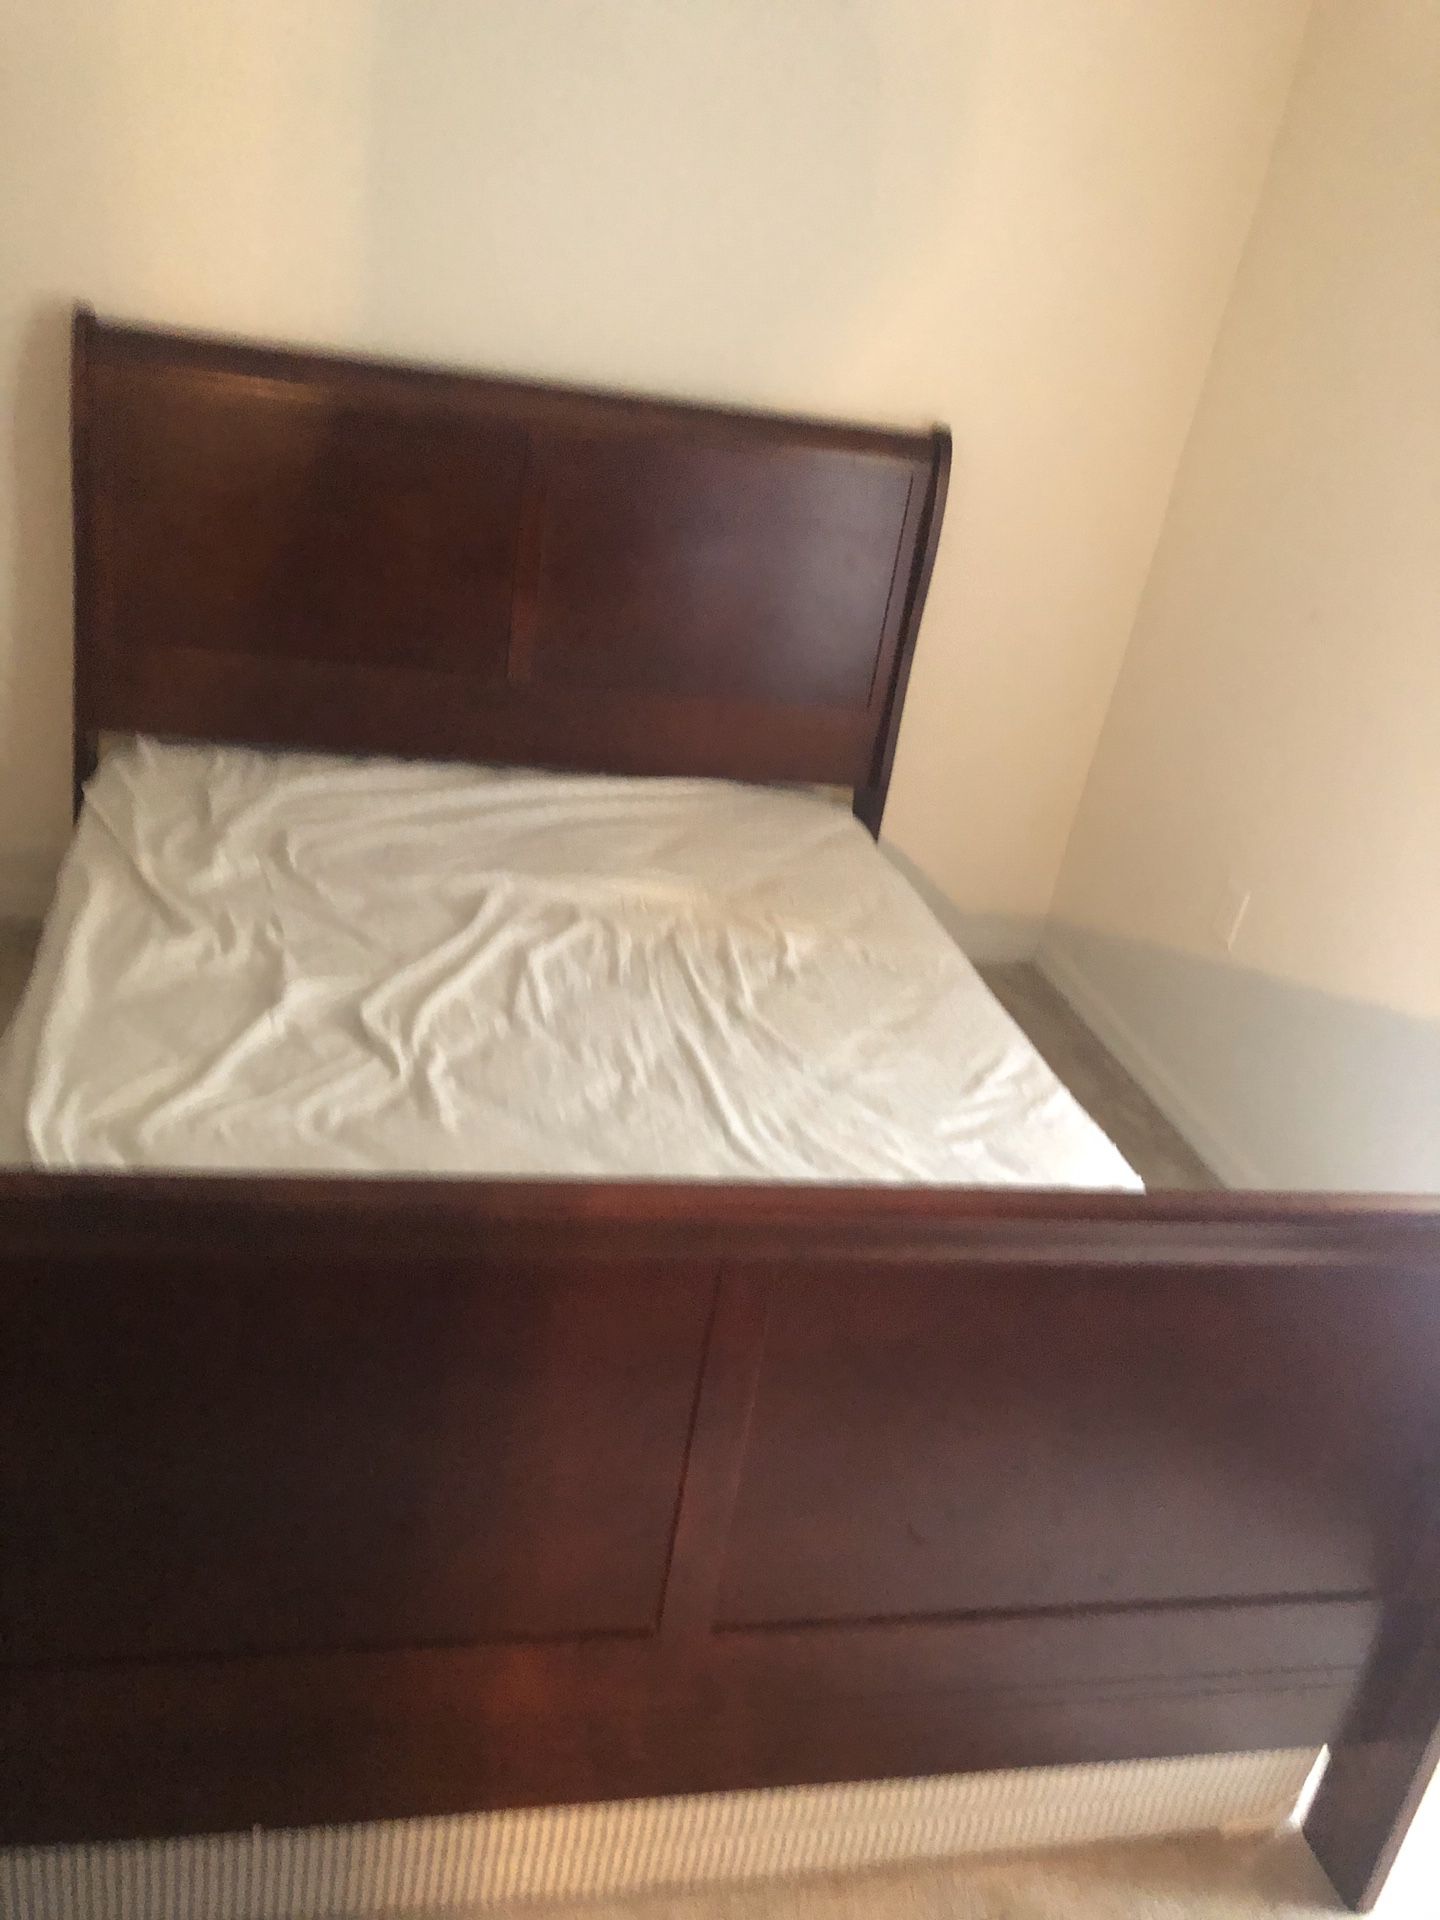 Queen size bed frame, mattress and box spring